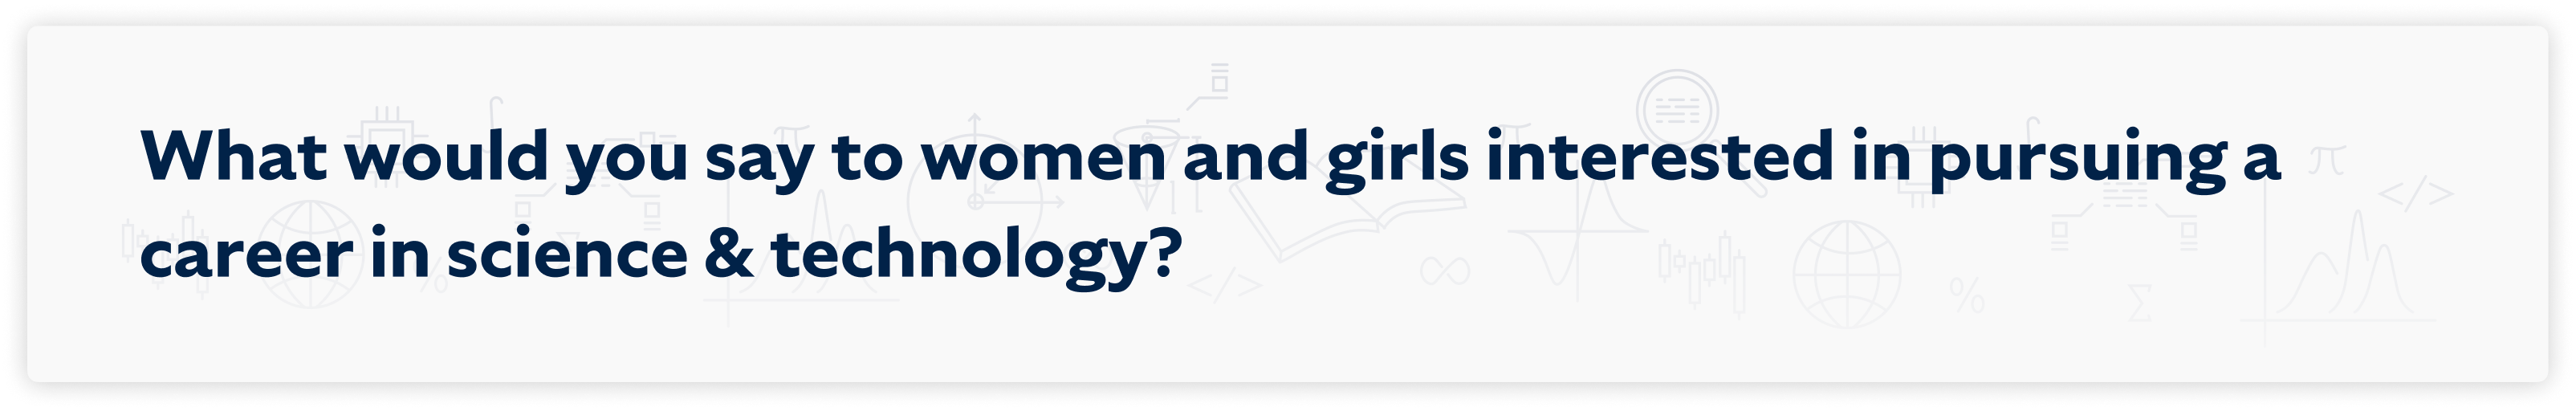 What would you say to women and girls interested in pursing a career in science and technology?